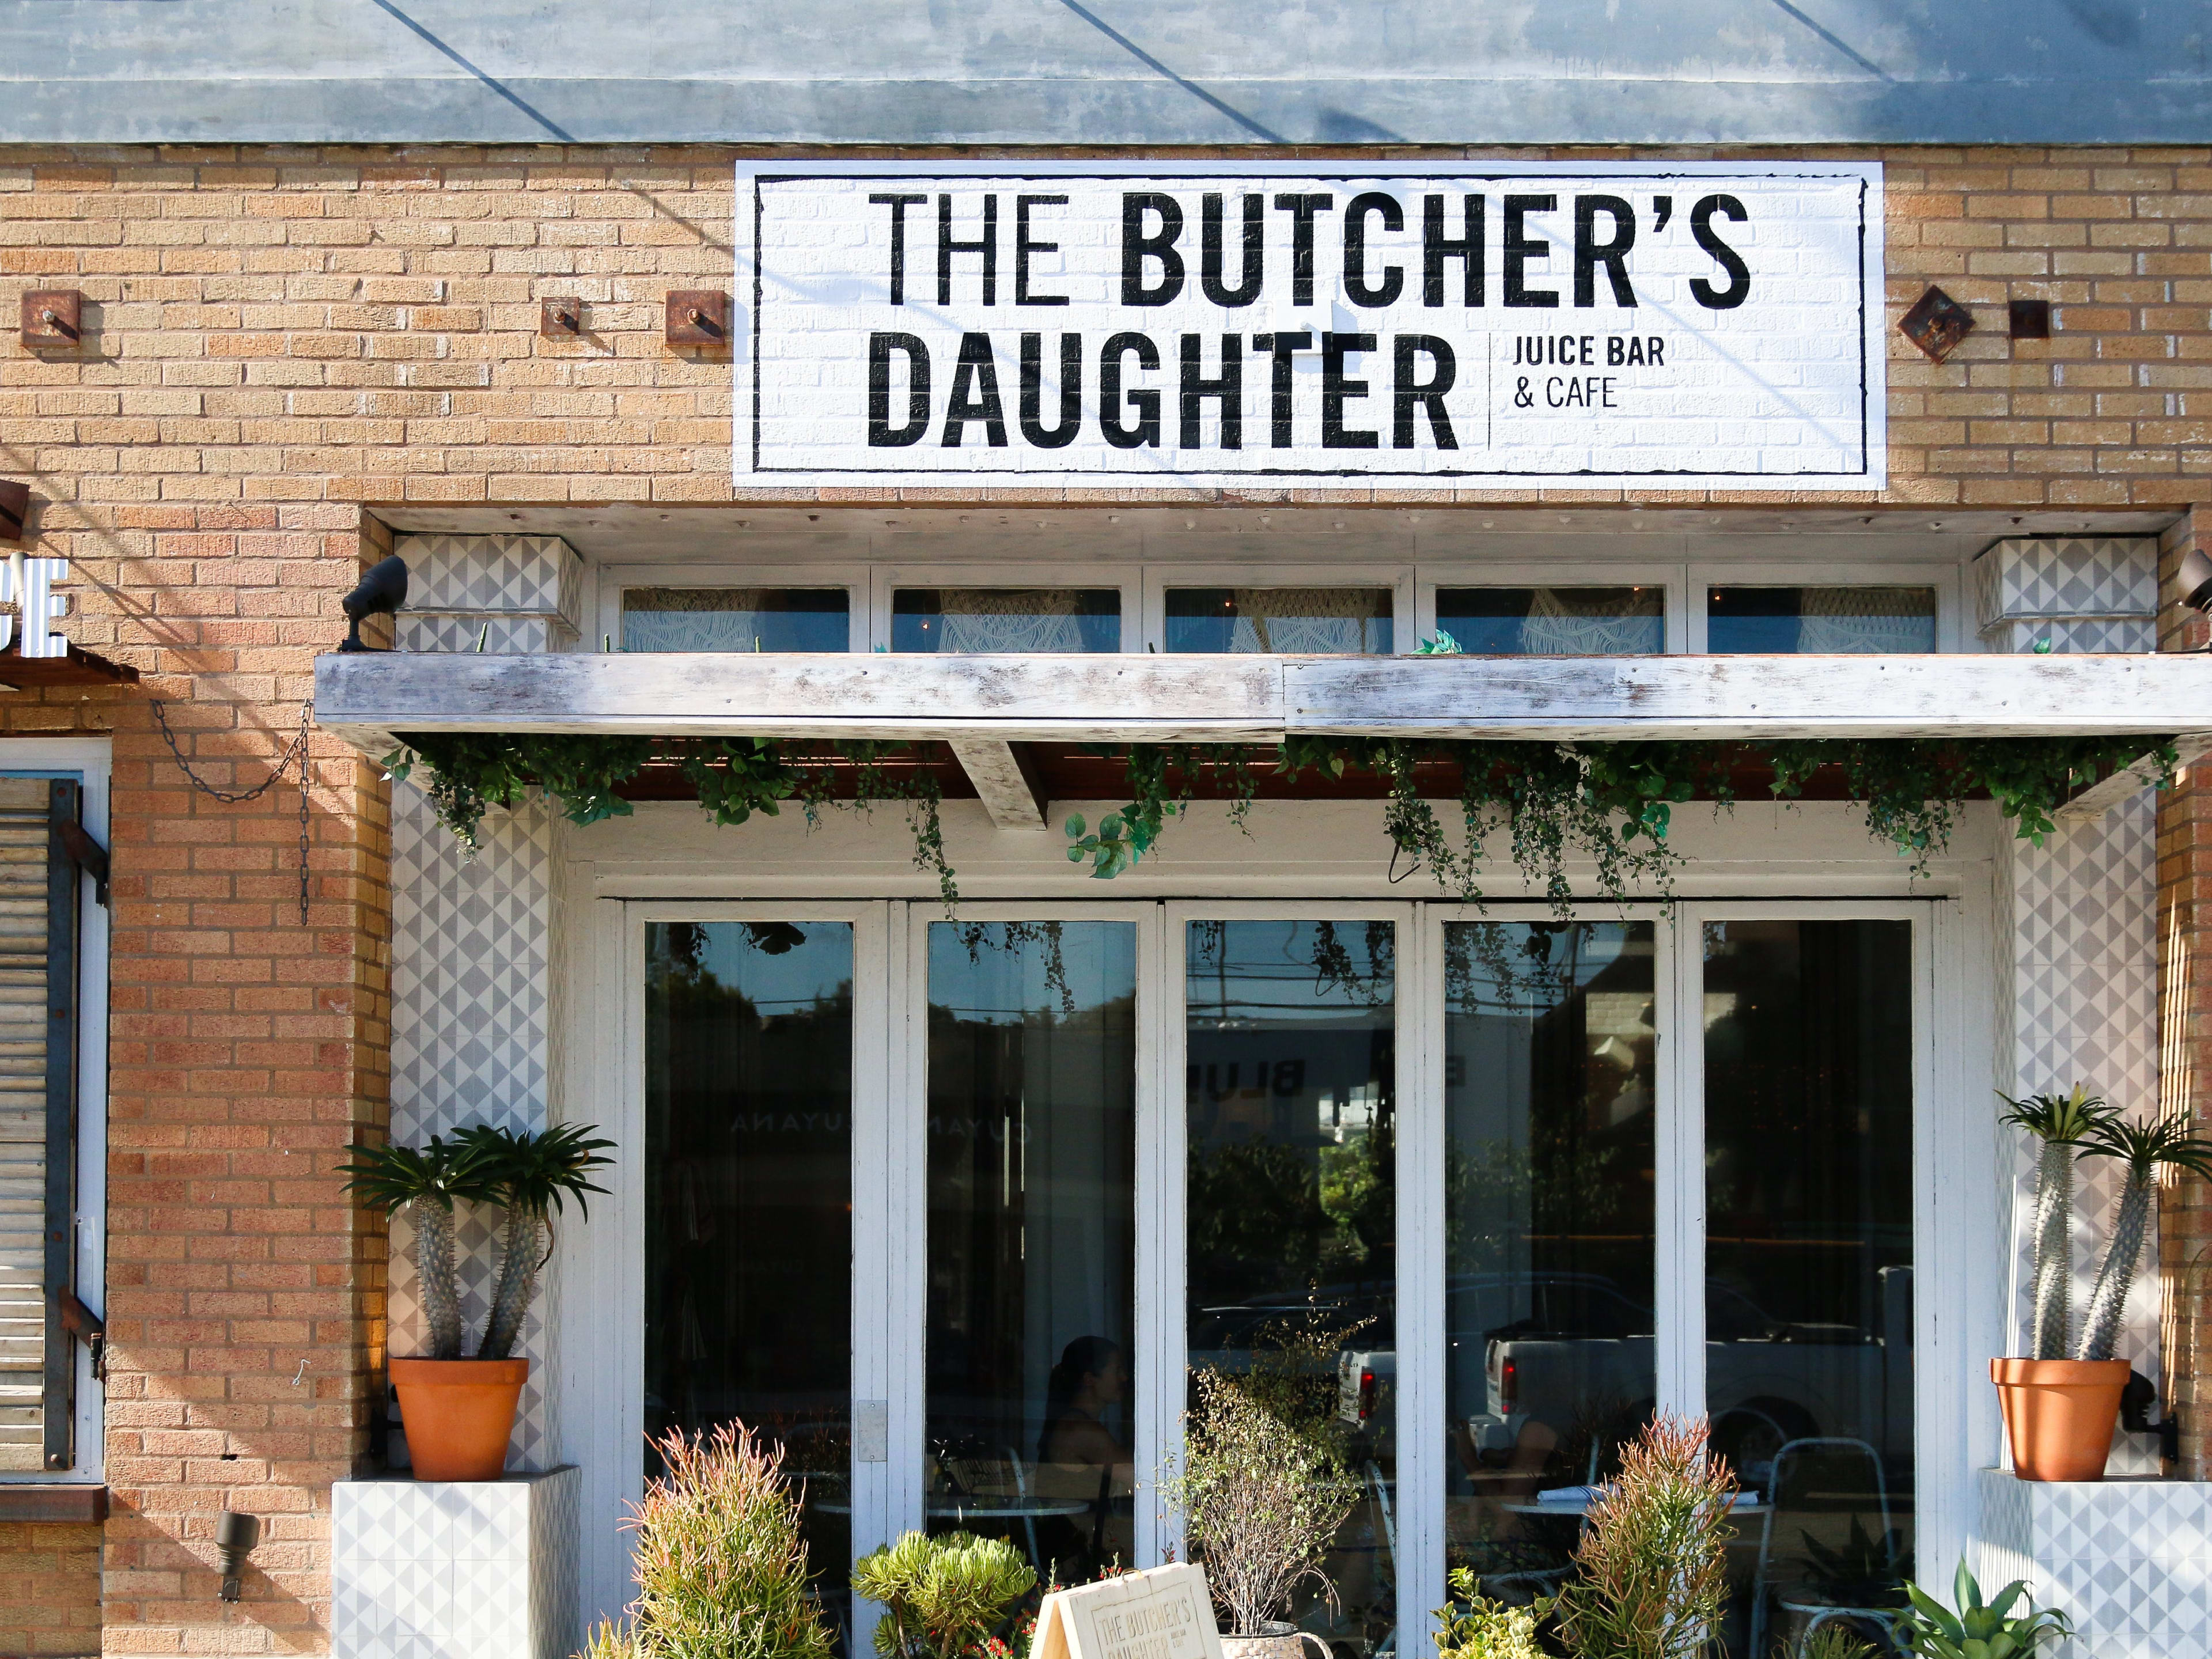 The Butcher’s Daughter imageoverride image